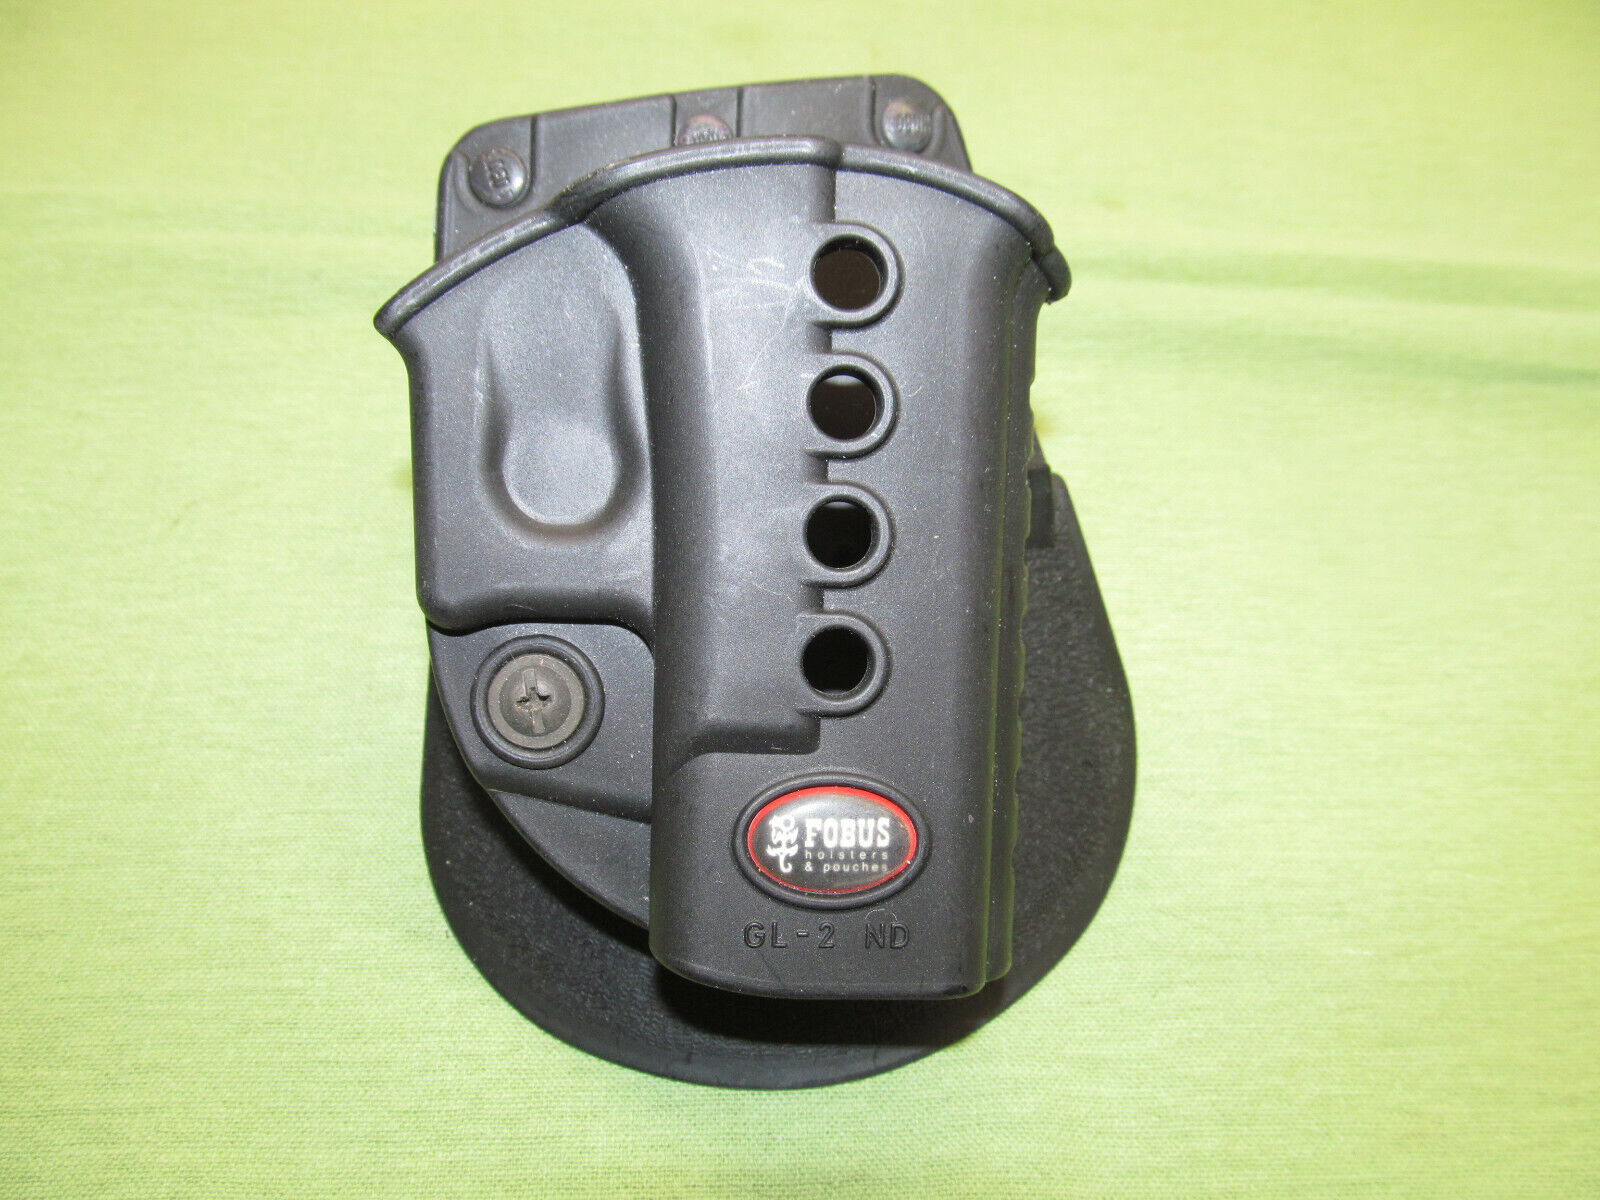 Fobus GL-2 ND RH Paddle Holster for Glocks - Updated Design w/ Tension Screw